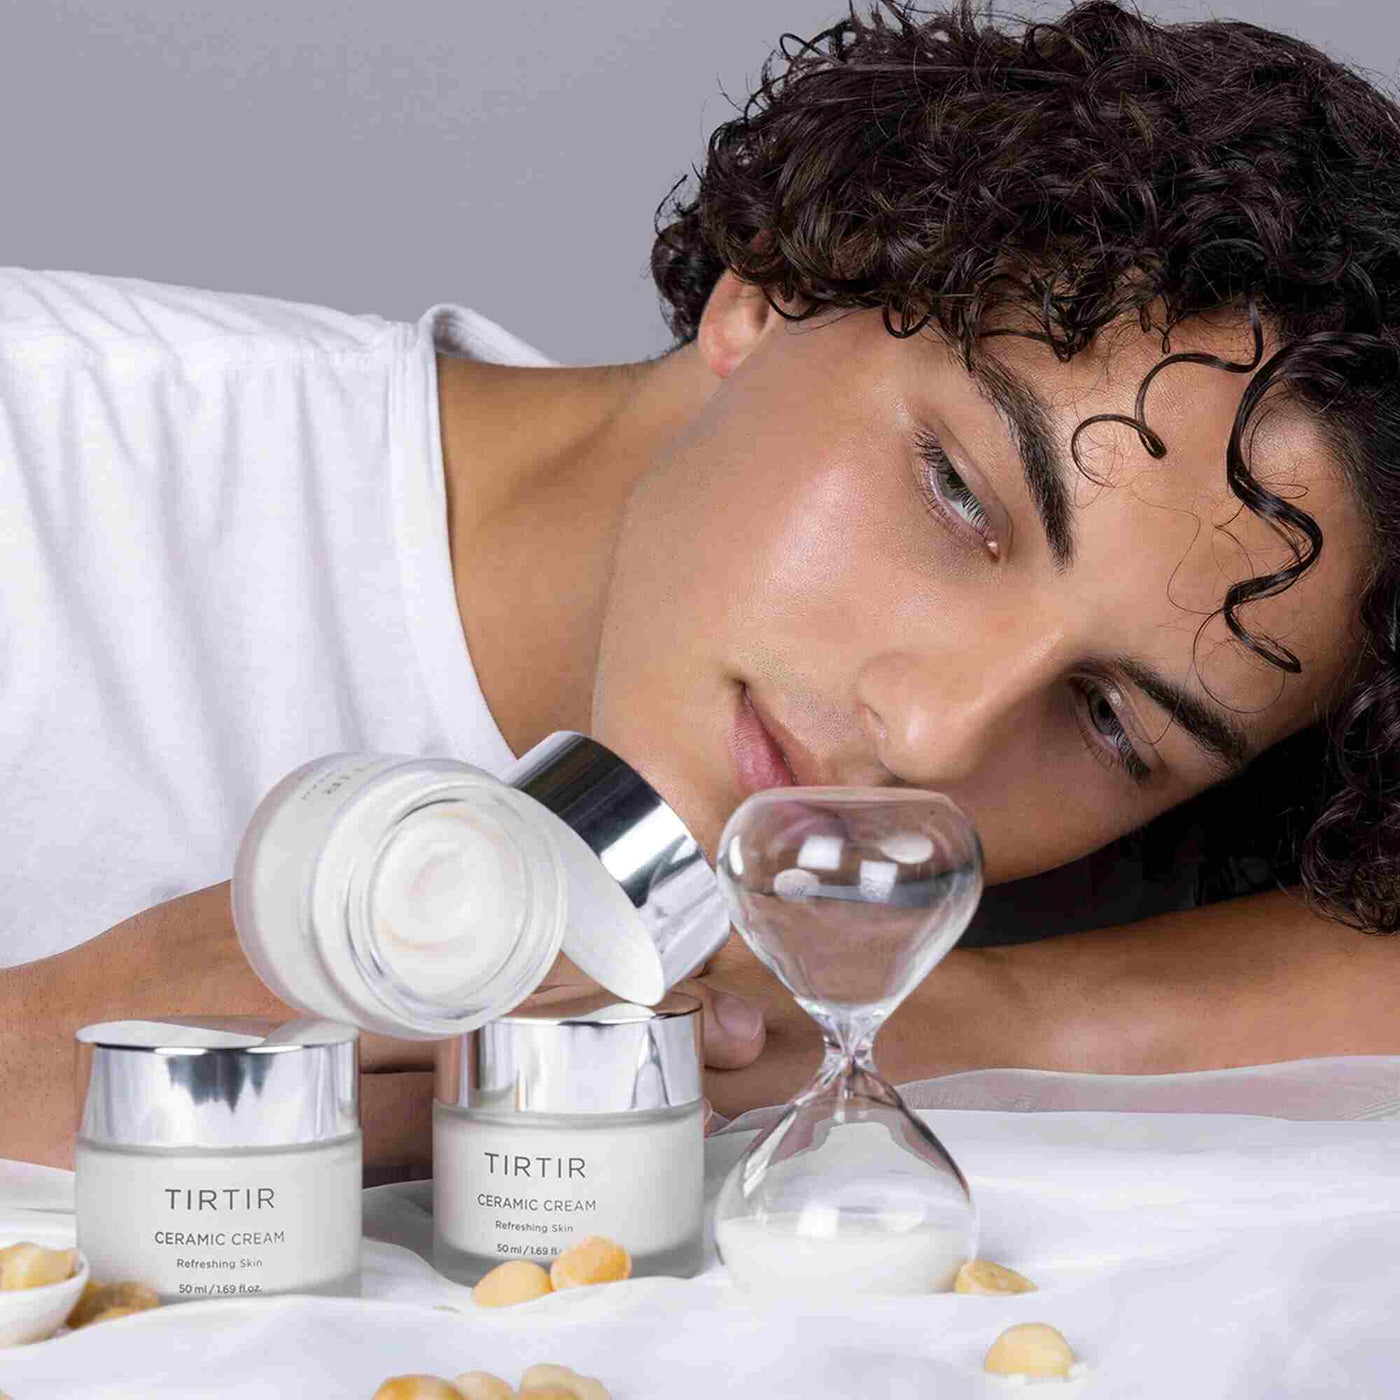 Shop best of men's skincare products at Luxiface.com